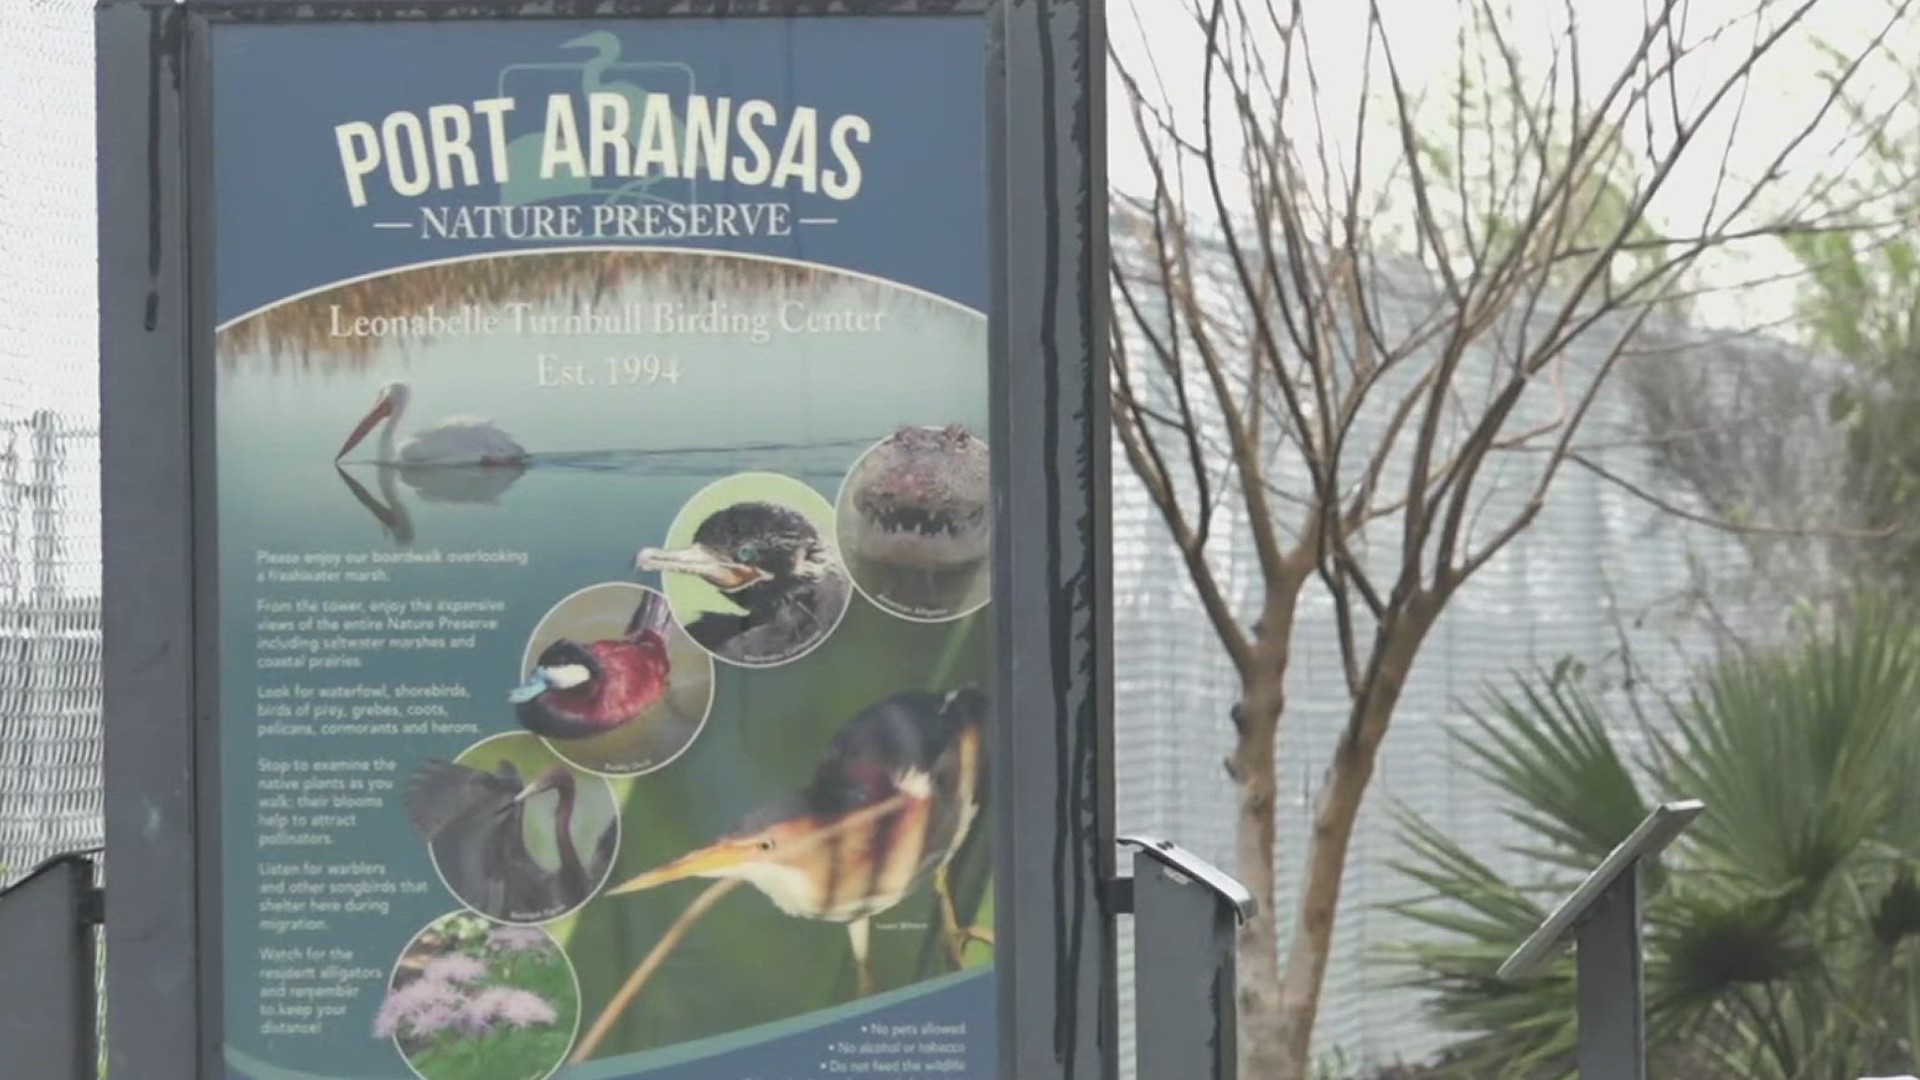 The Port A Nature preserve's visitors' experience will soon be improved thanks to a $1 million dollar grant from the U.S. Department of Treasury.